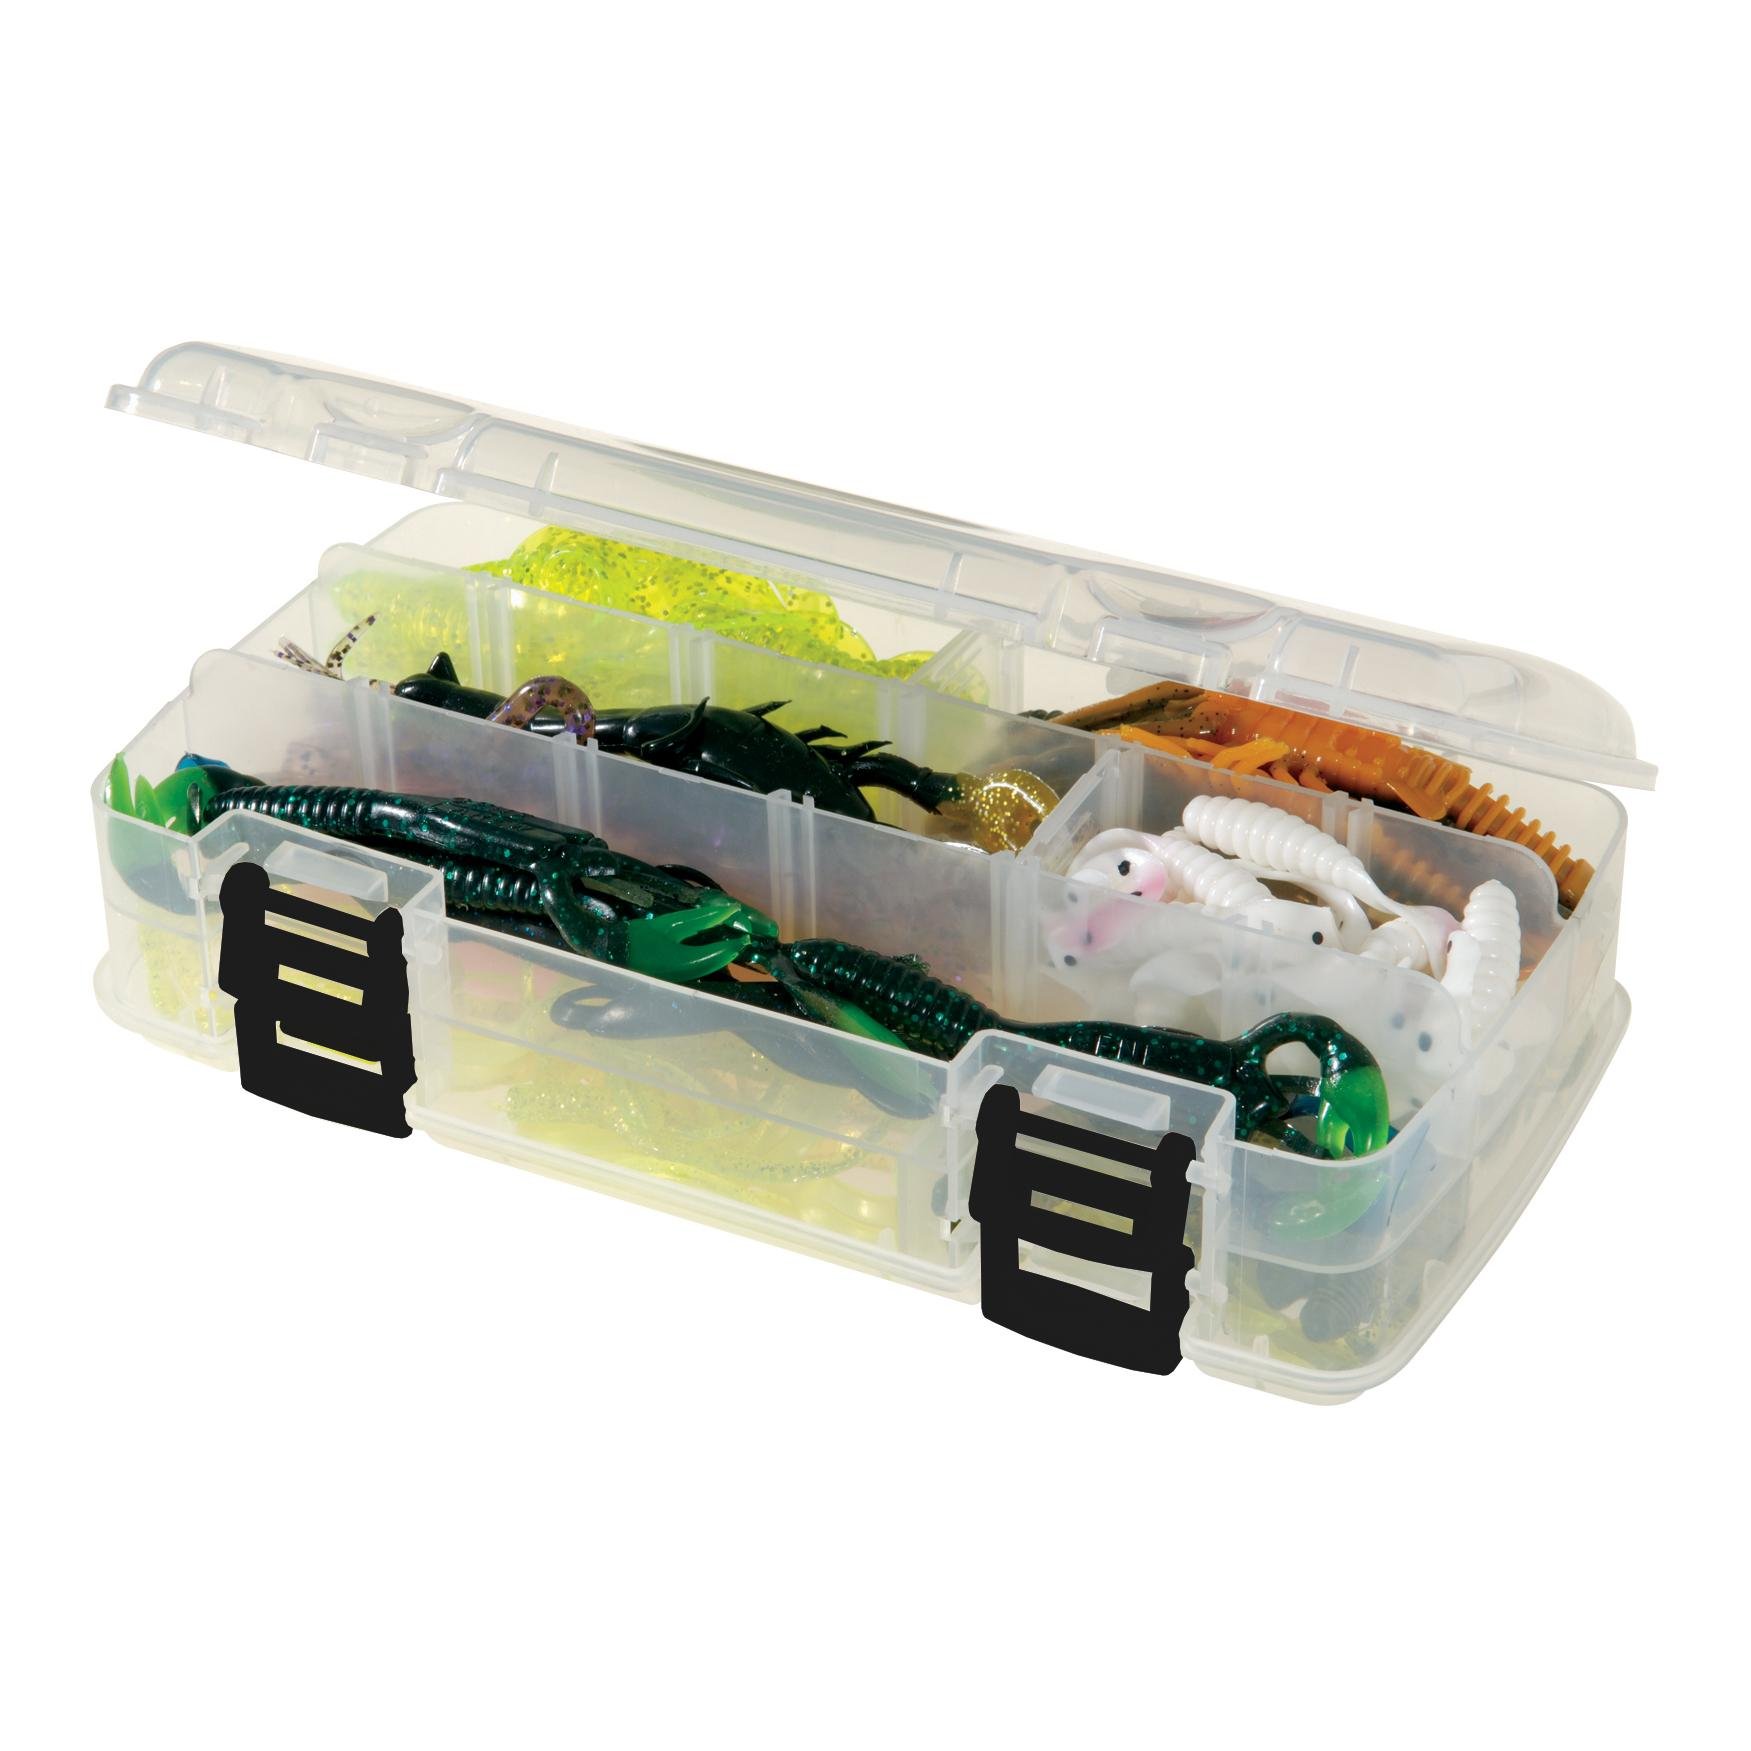 Image of Plano Adjustable Double-Sided Stowaway® Large - Köderbox bei fischen.ch